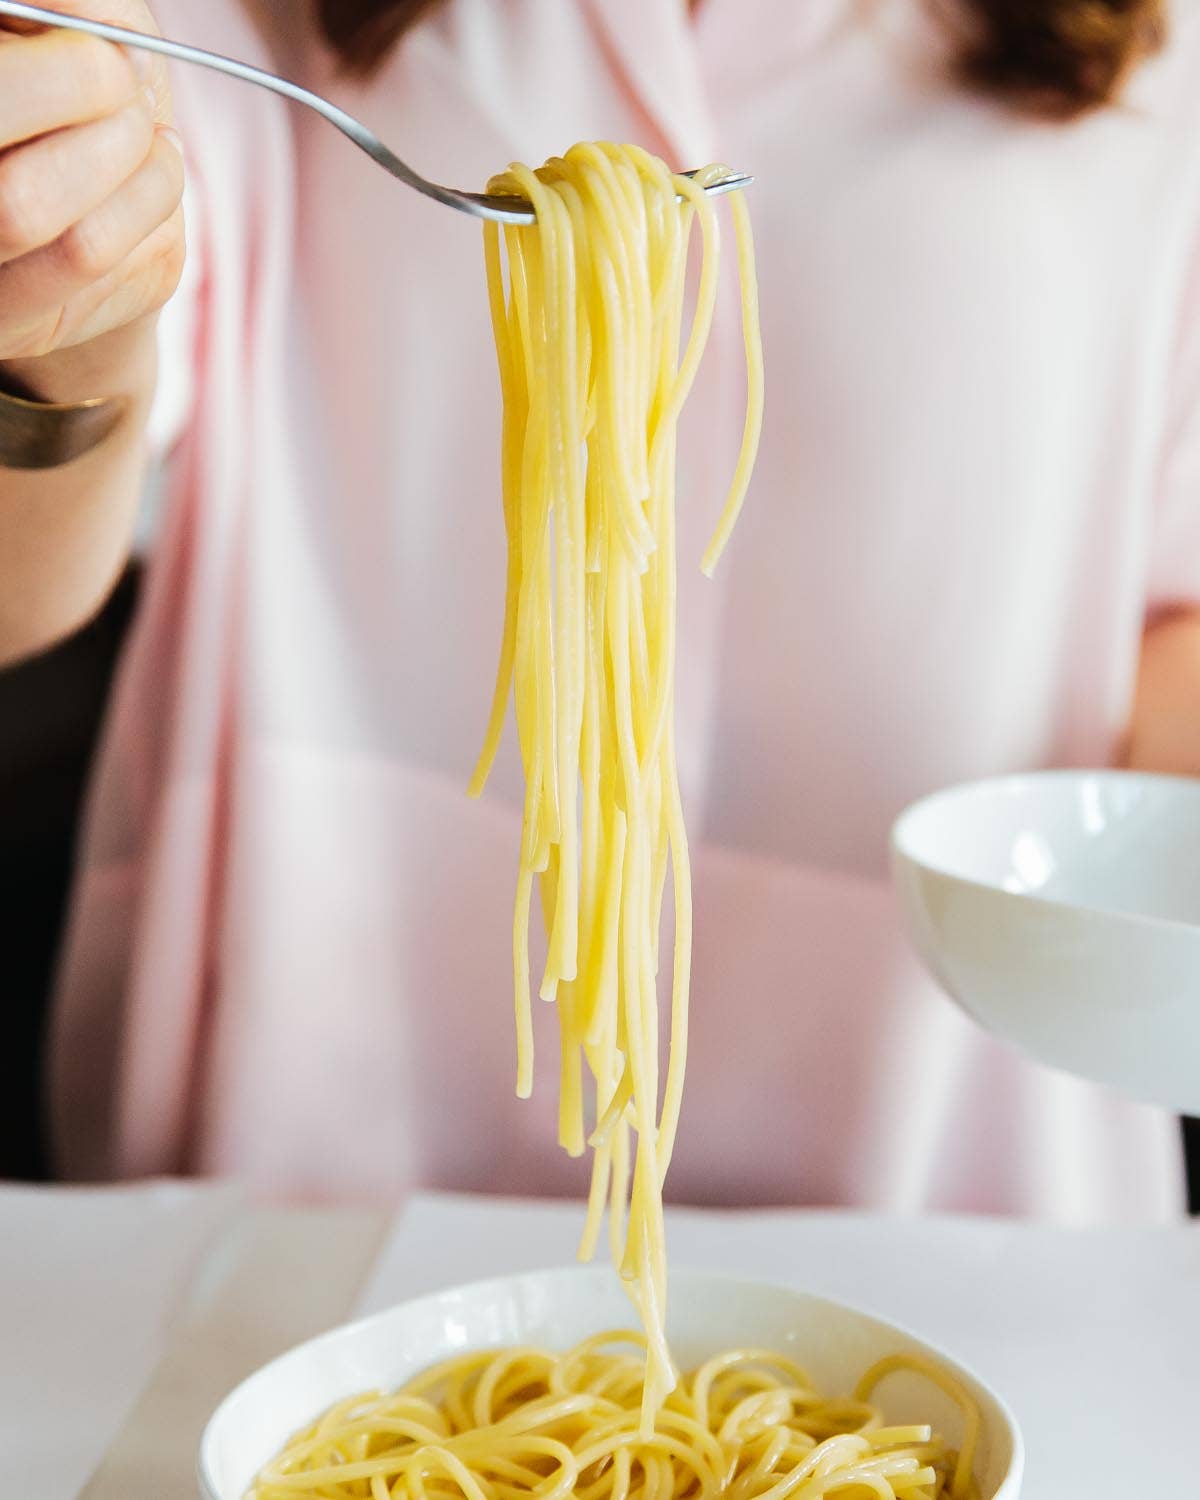 Is Any Pasta Worth $11 a pound?